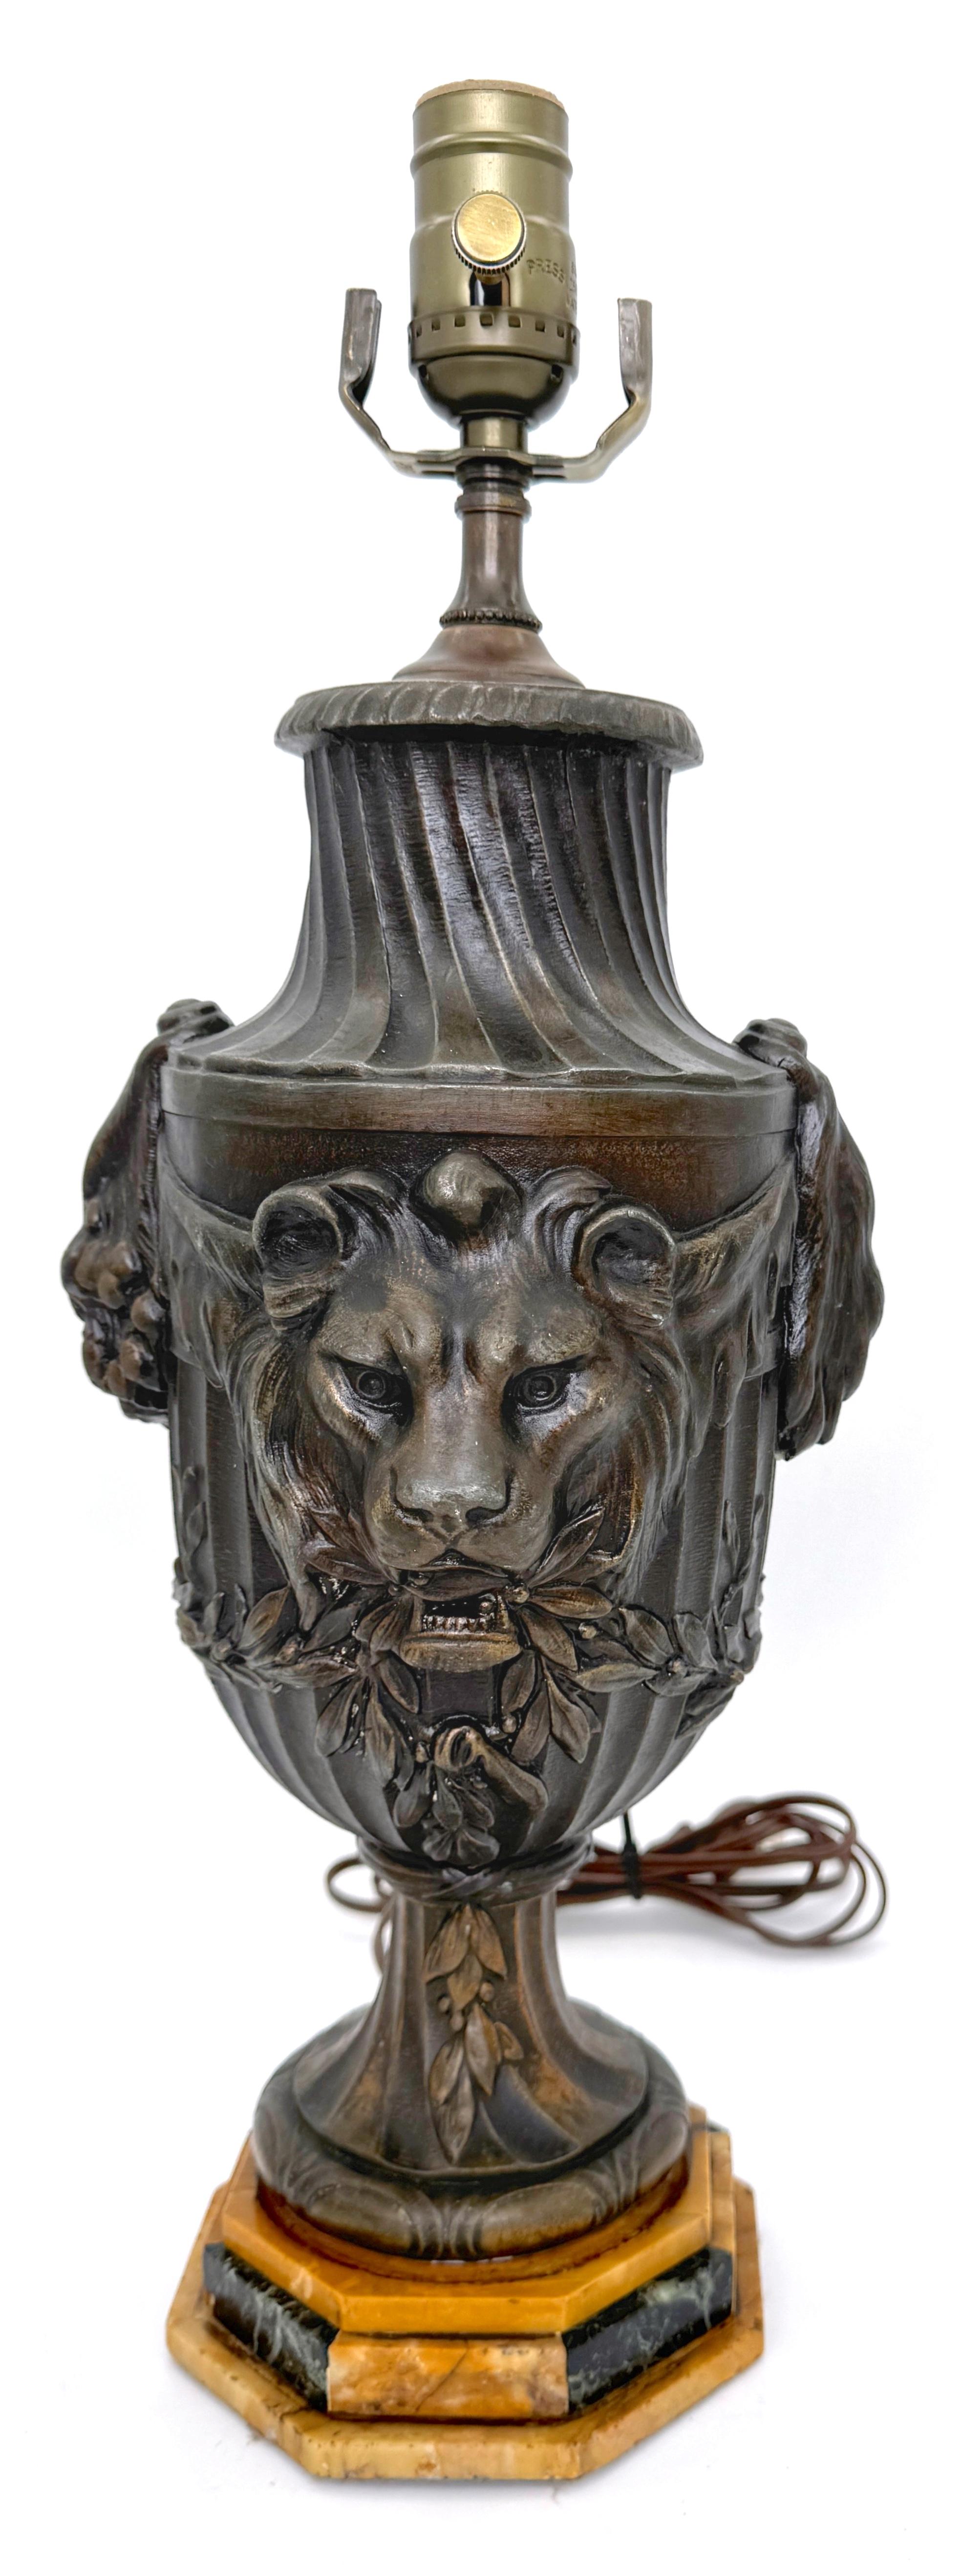 Napoleon III Bronzed Zinc 'Trophy'  Loin & Lioness & Specimen Marble Lamp 
France, 19th Century

A Napoleon III Bronzed Zinc 'Trophy' Loin & Lioness Specimen Marble Lamp from 19th-century France. This fine 'Trophy' example stands at a height of 19.5